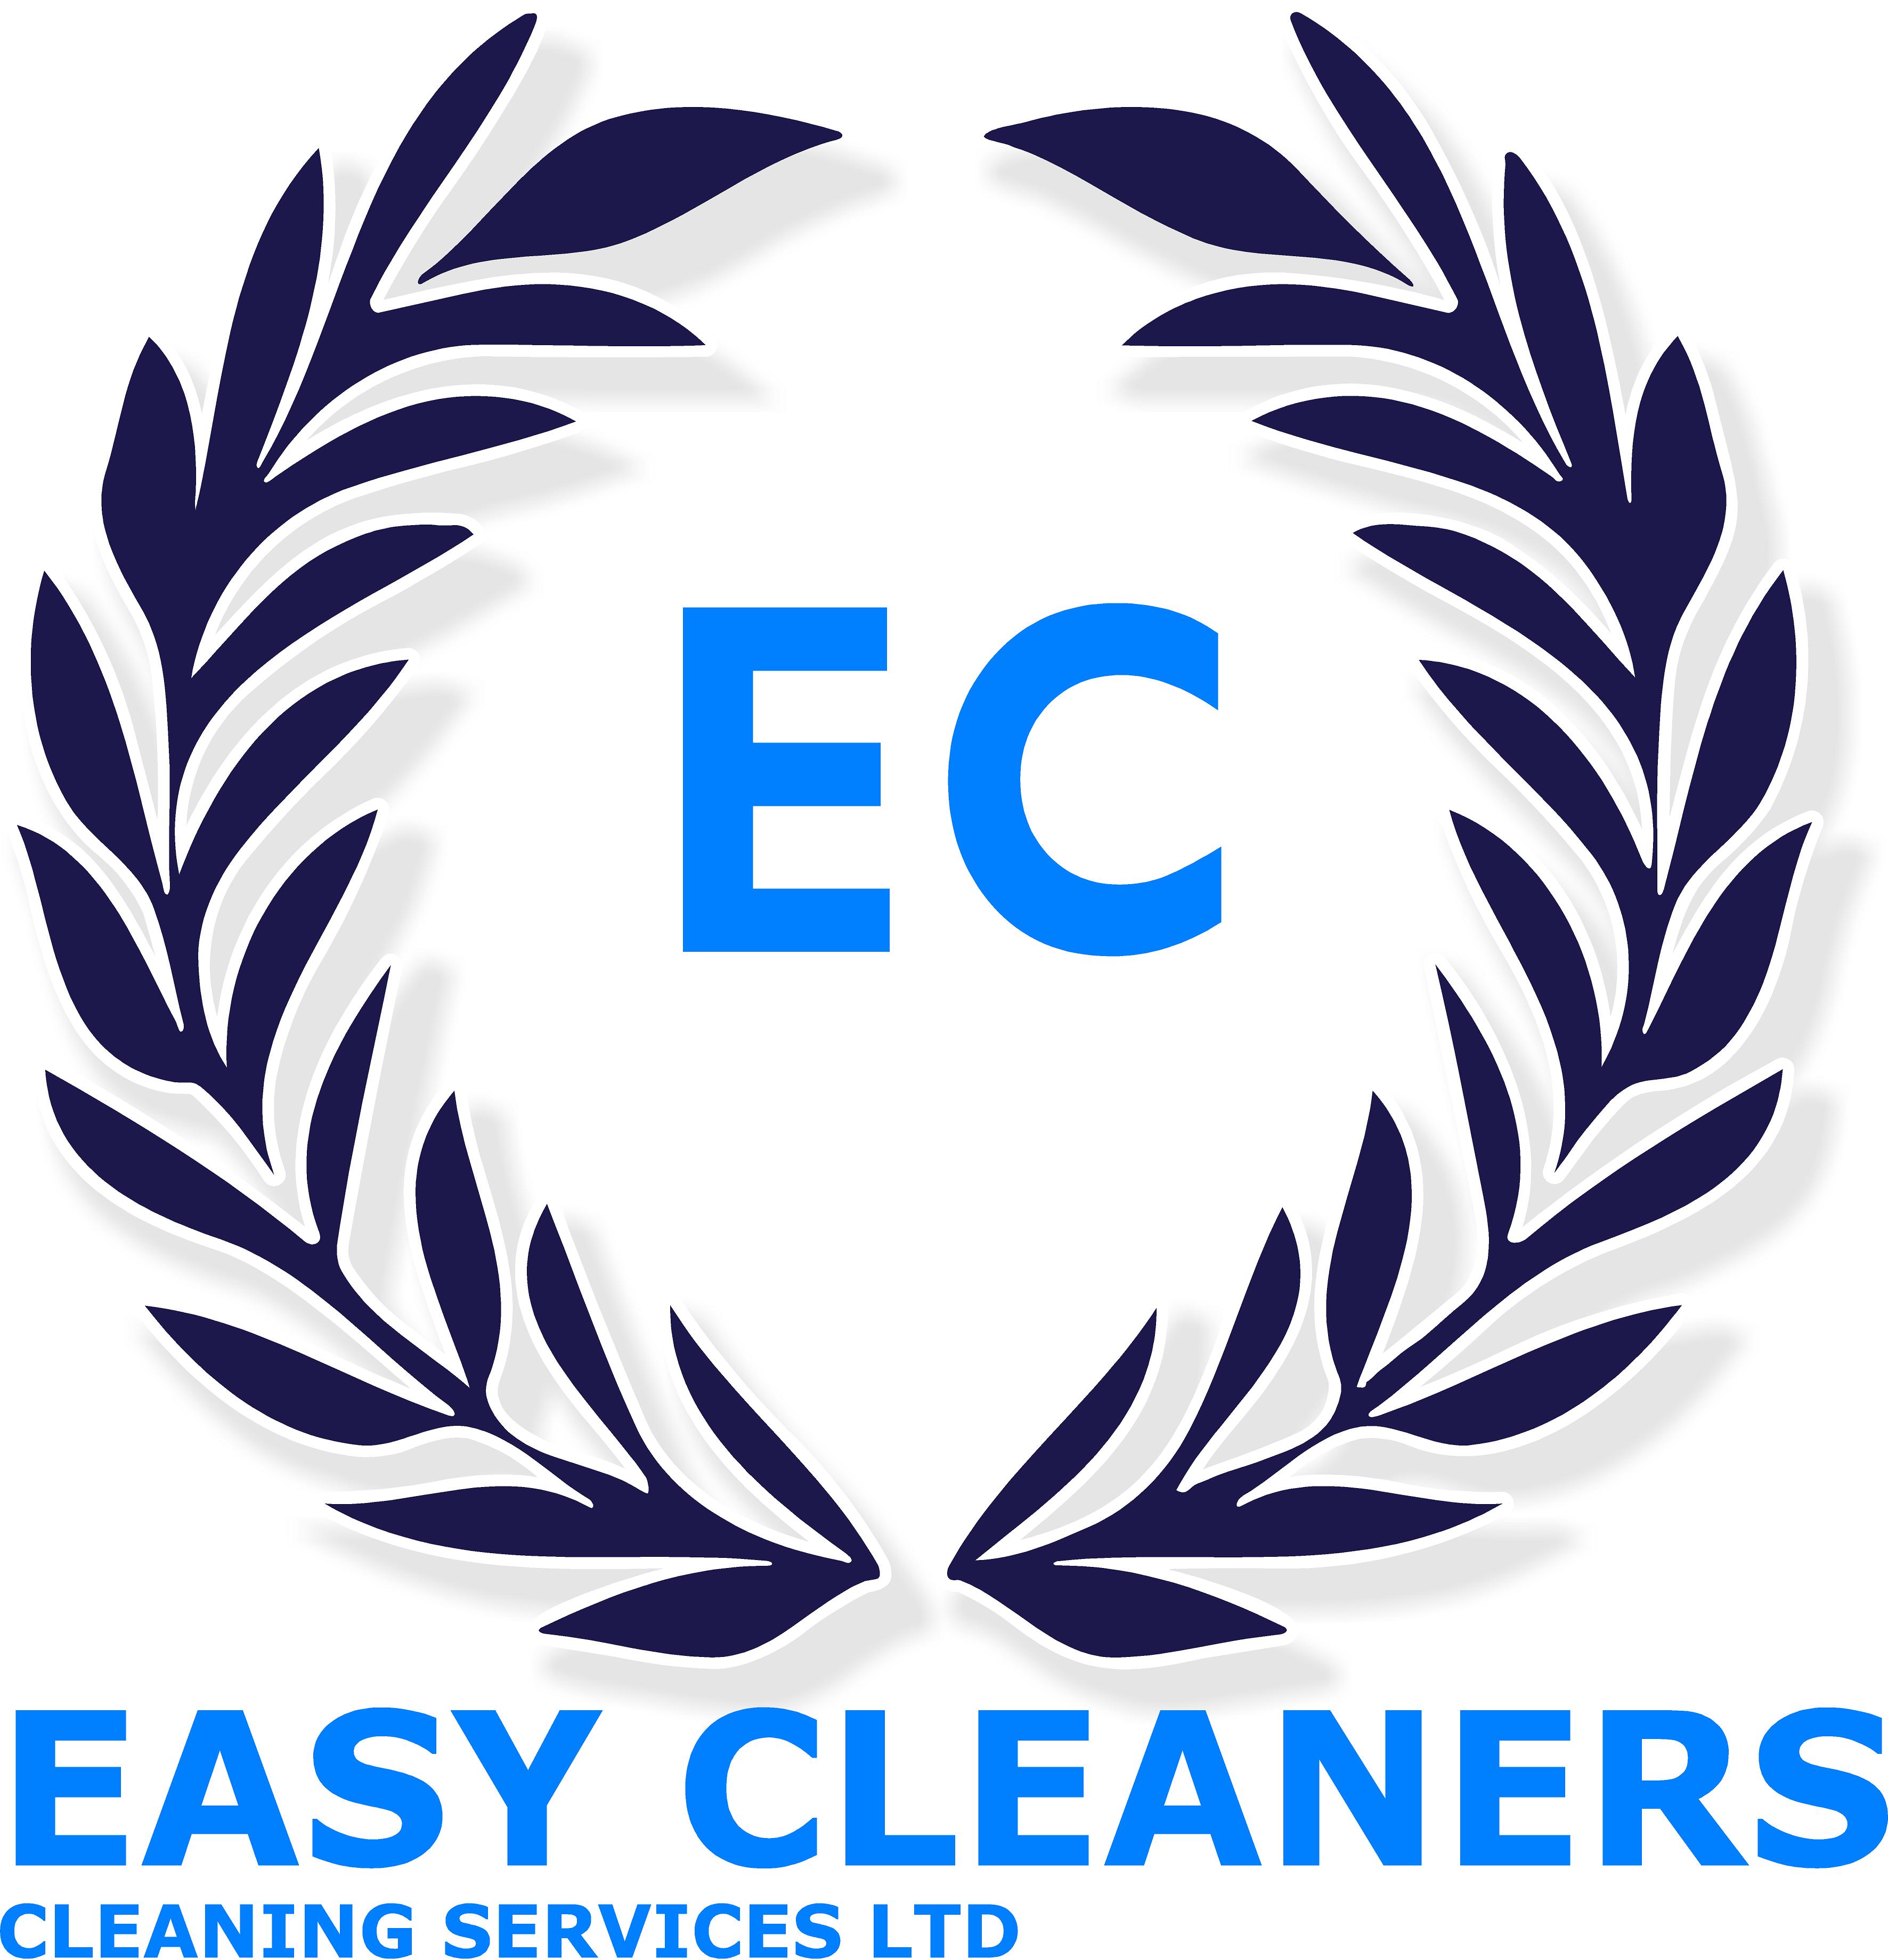 Easy Cleaners Cleaning Services Ltd